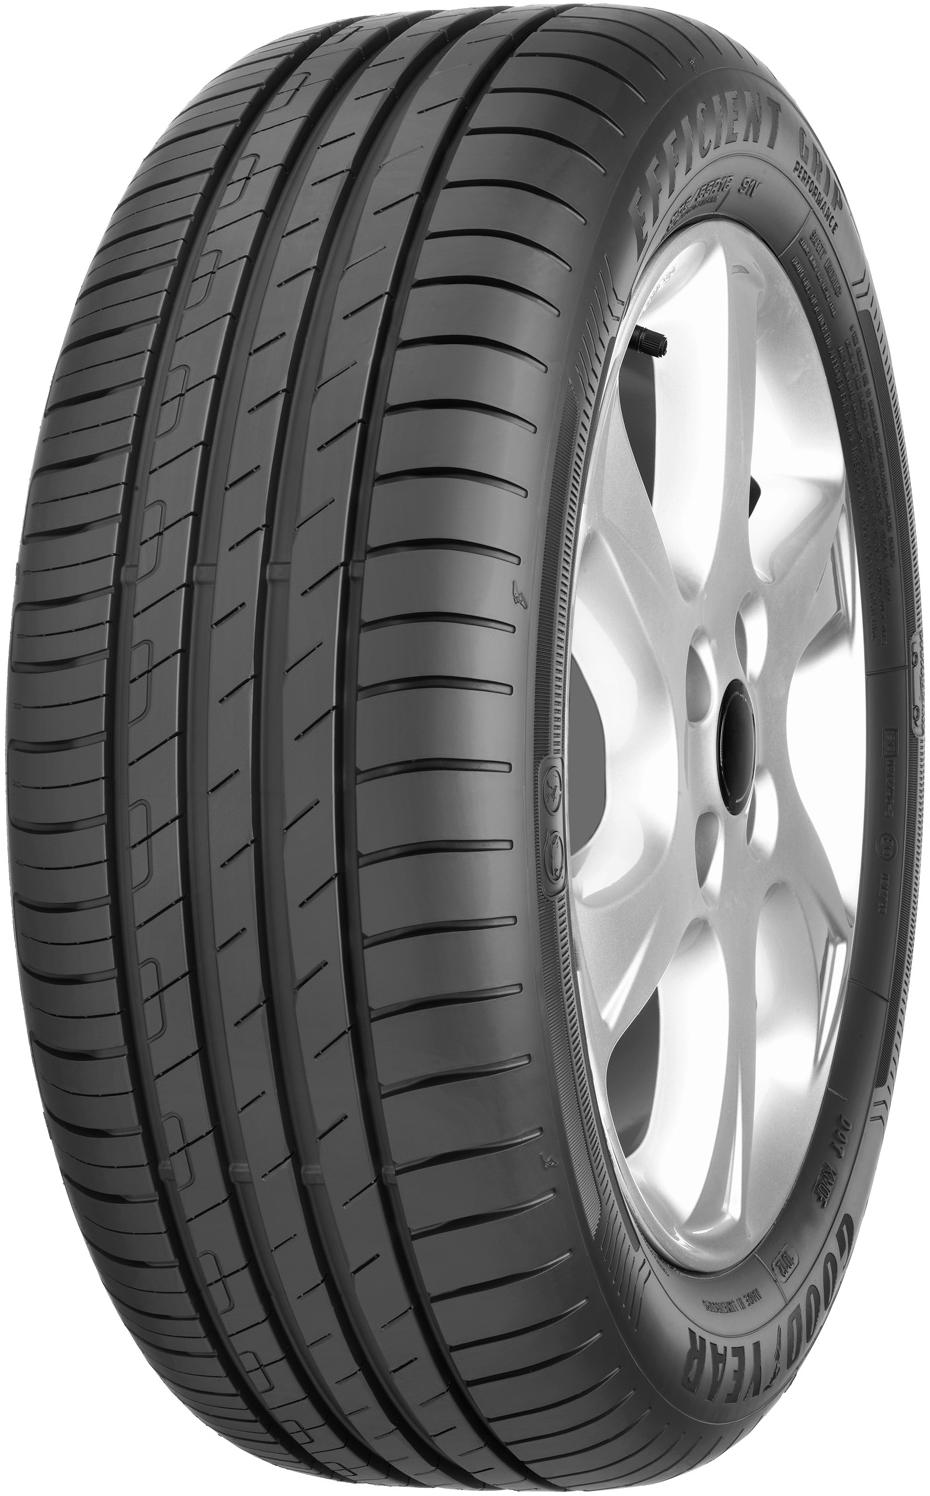 Anvelope auto GOODYEAR EFFICIENTGRIP PERFOR XL 175/65 R14 86T